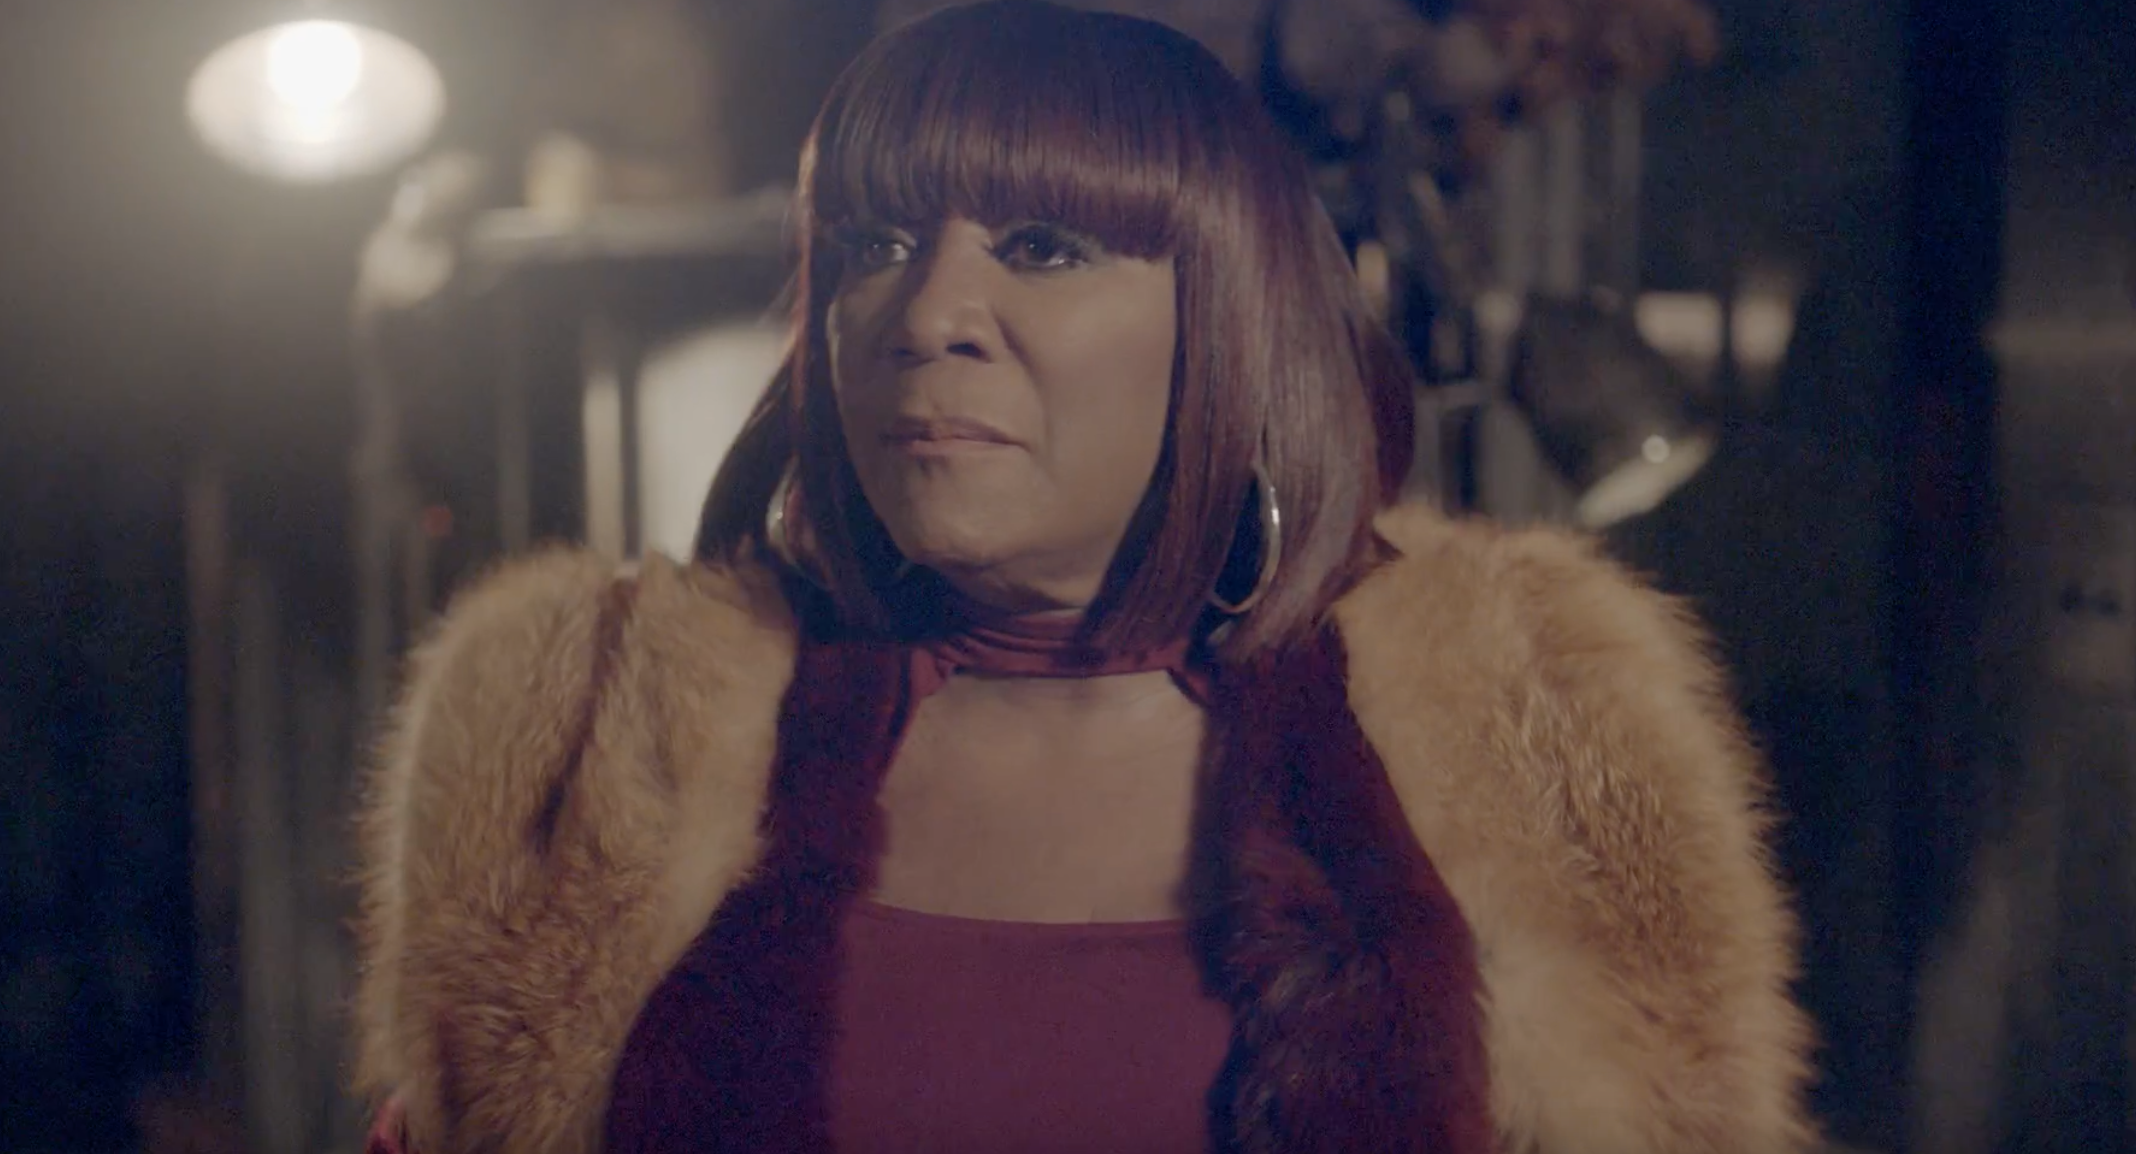 EXCLUSIVE: See Patti LaBelle As A No-Nonsense Mom And Gangster In This 'Star' Sneak Peek
